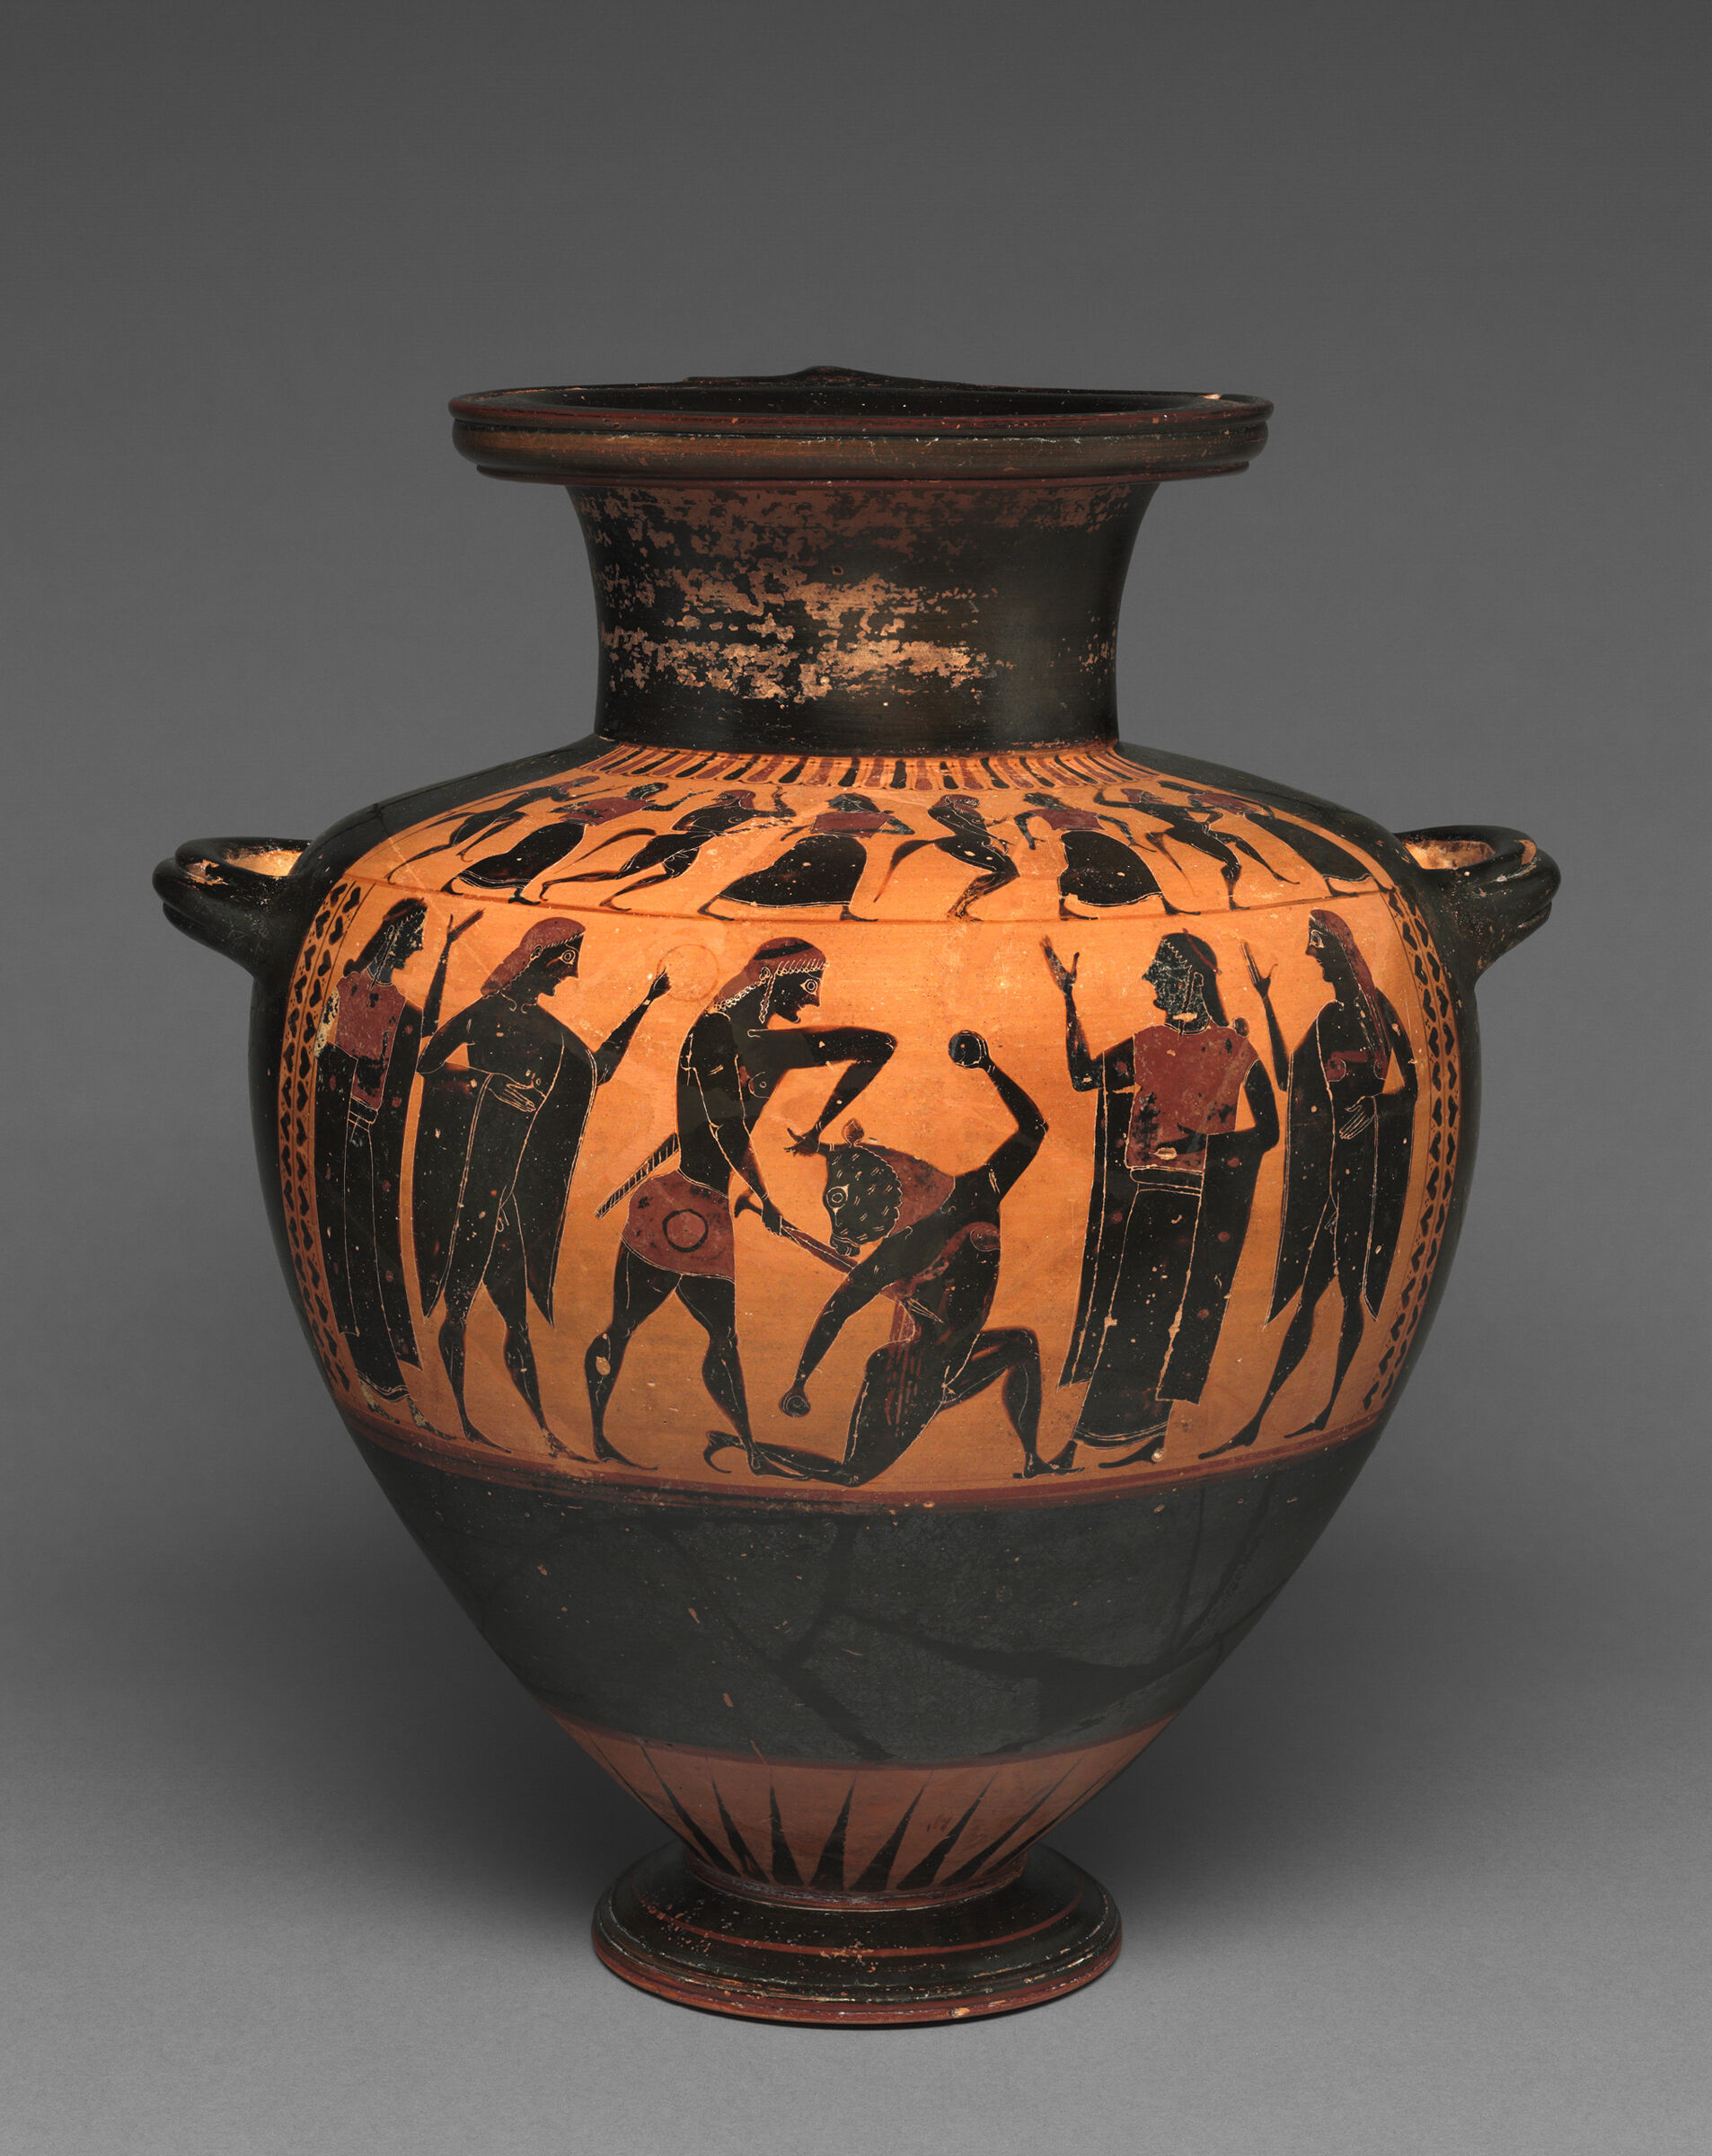 Hydria (Water Jar): Theseus And The Minotaur